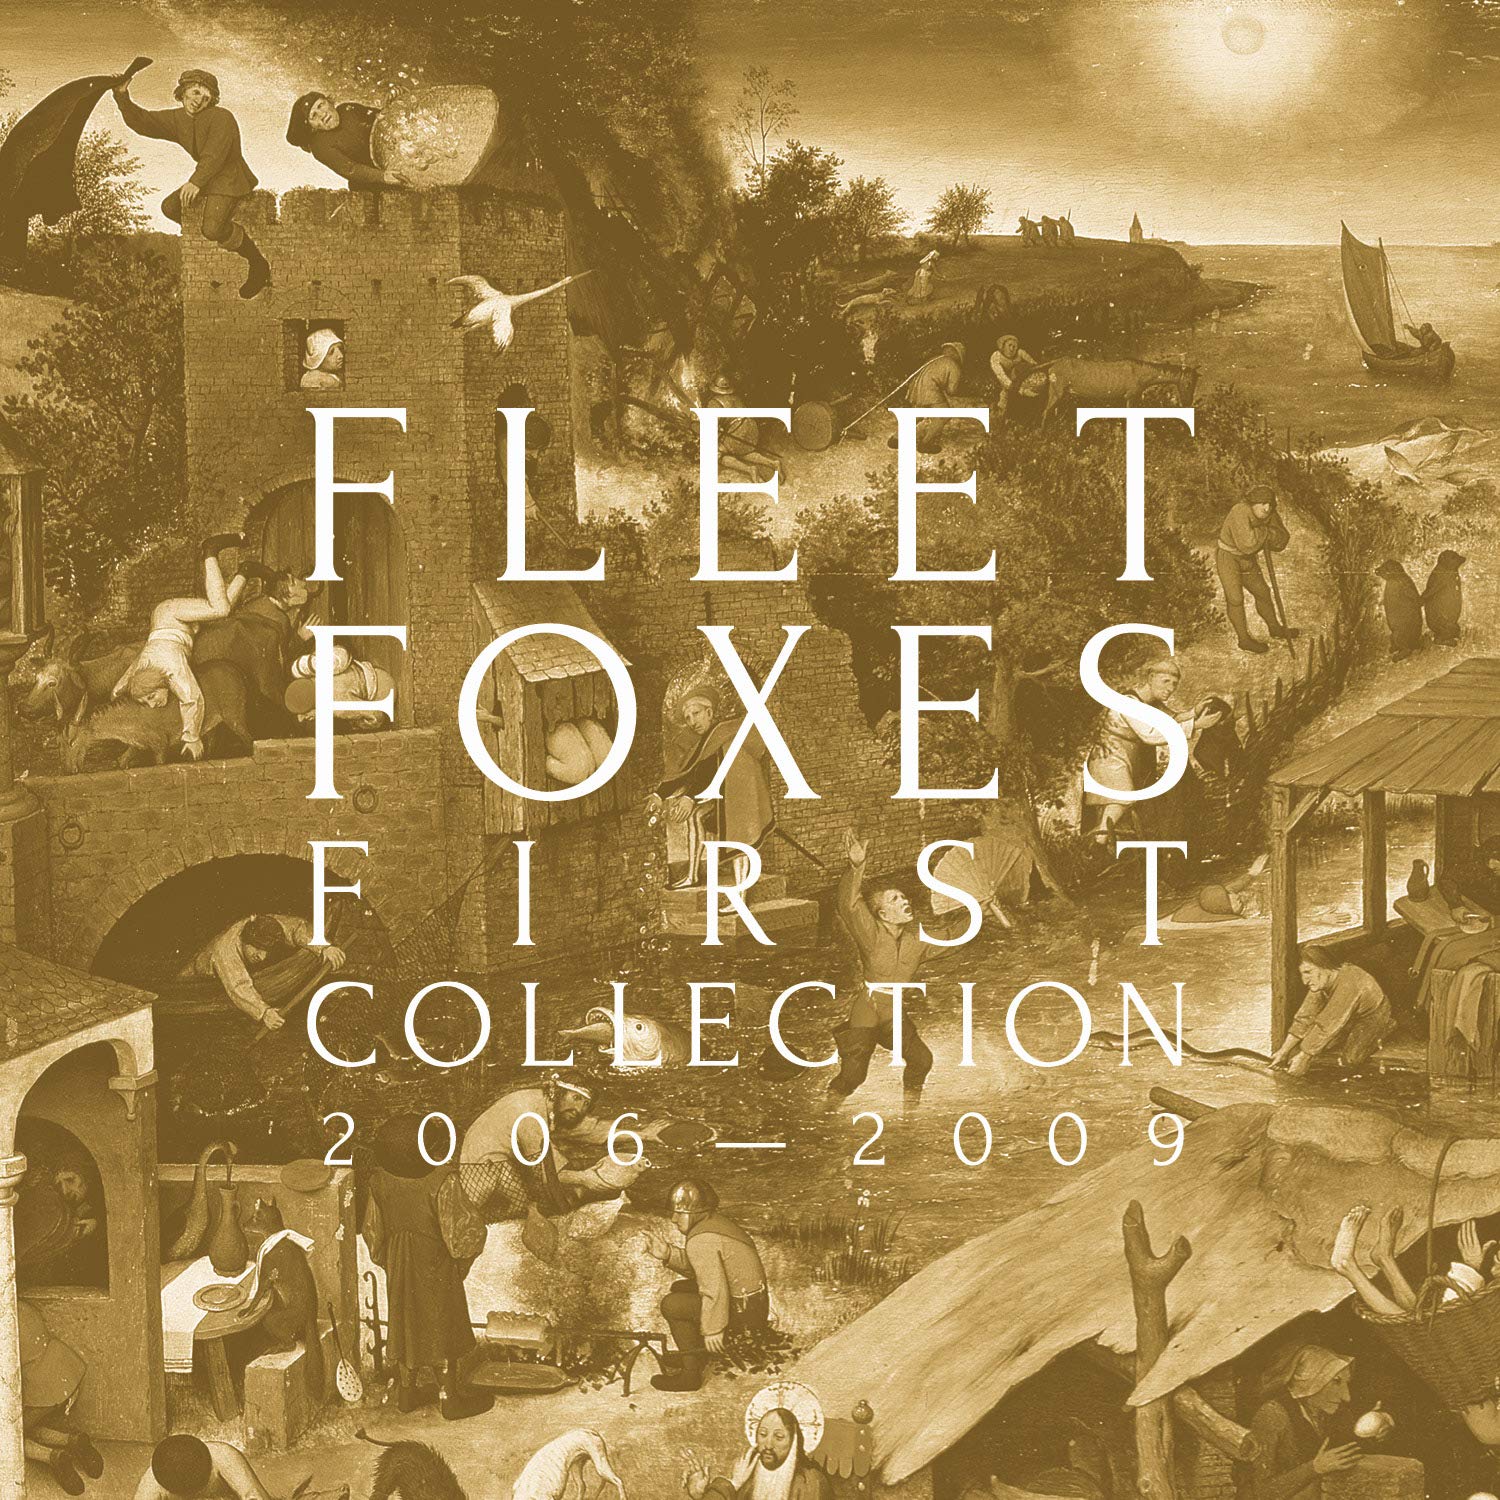 FLEET FOXES - First Collection 2006-2009 (4 discos) Limited Edition